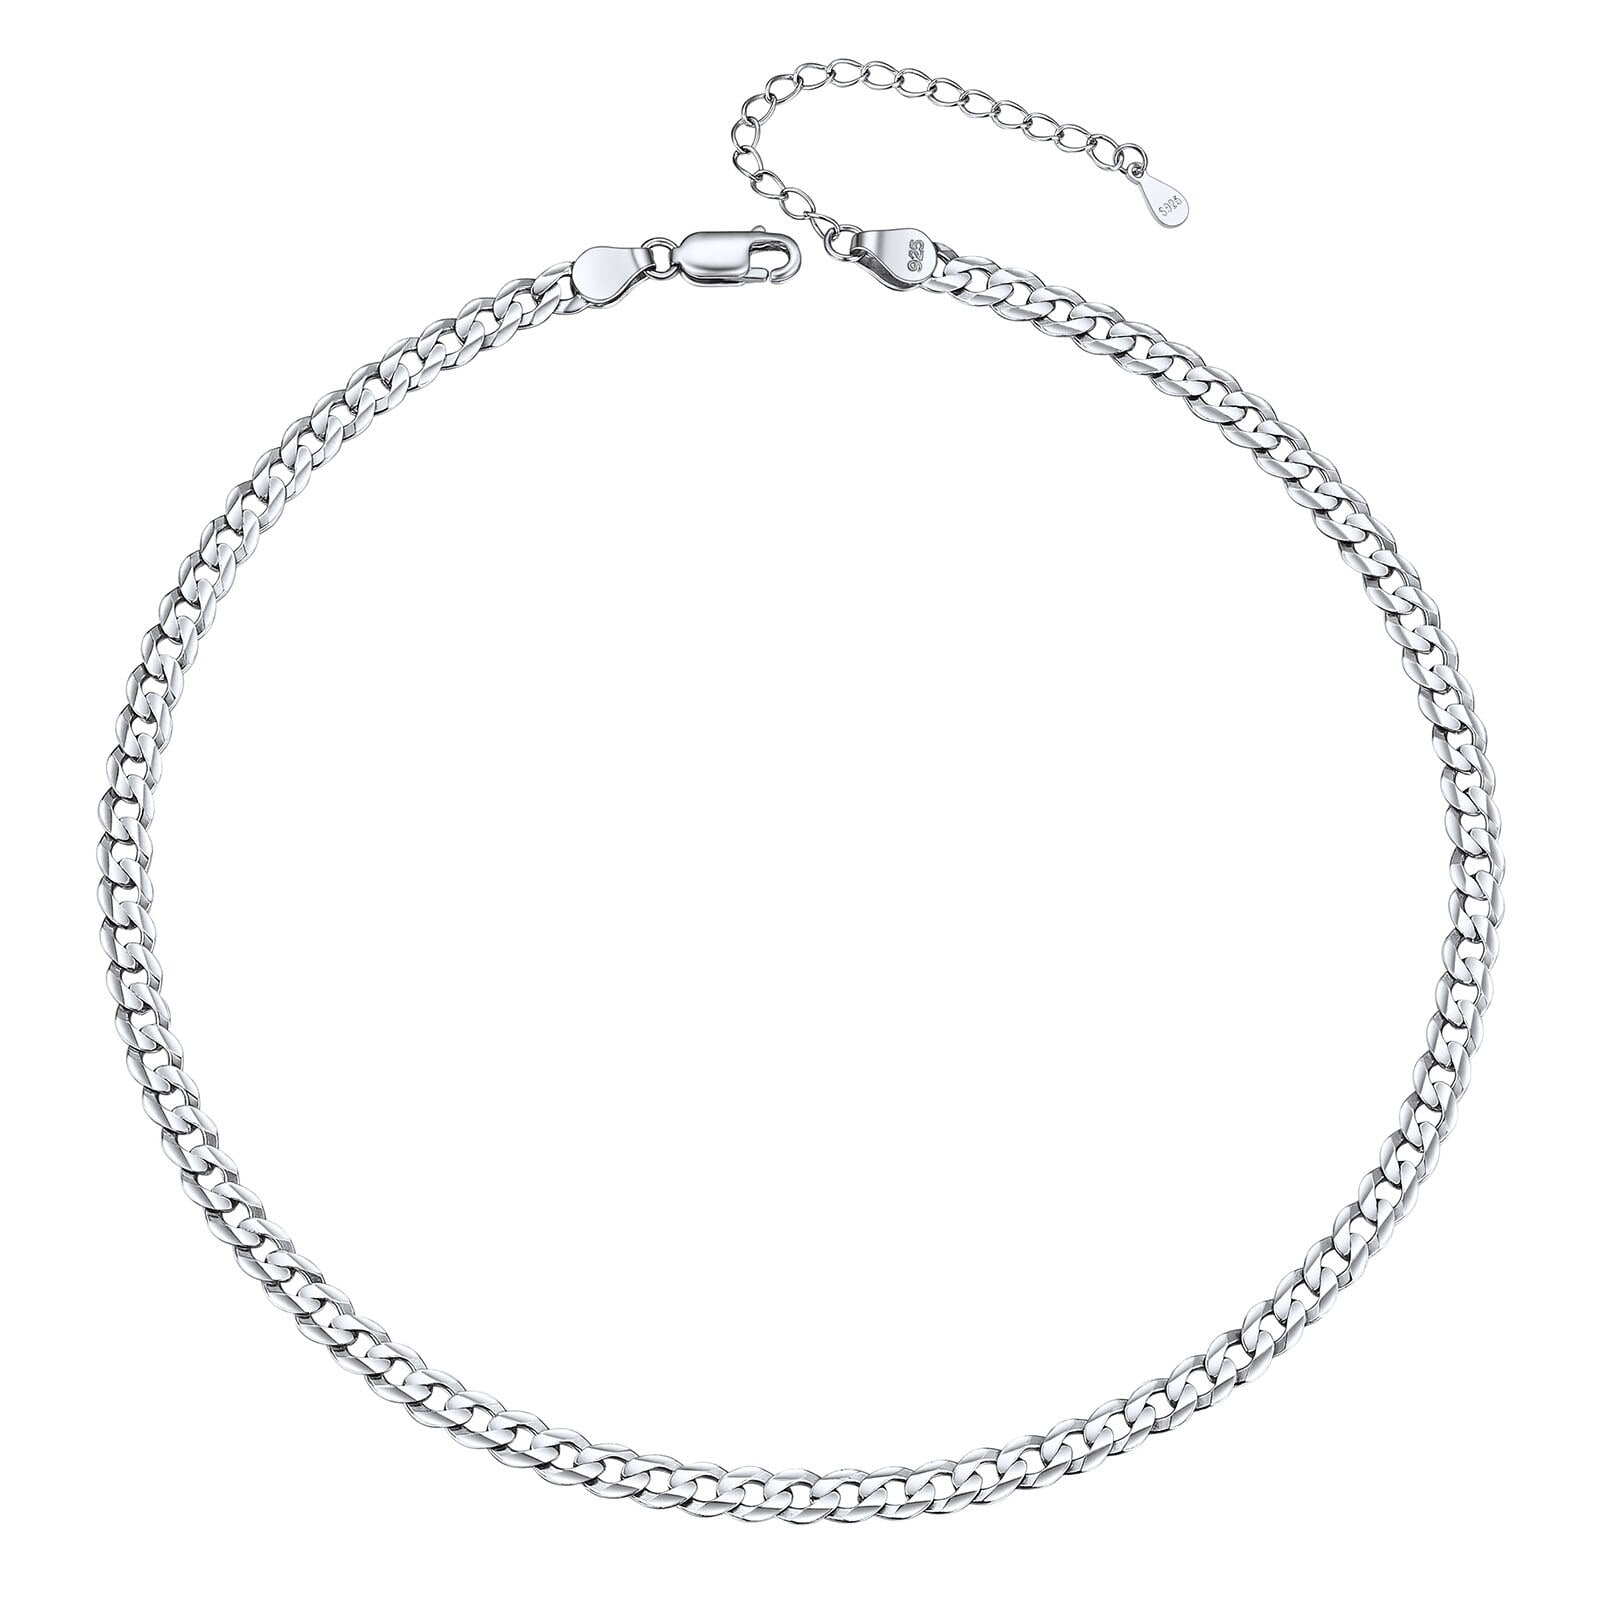 ChicSilver 925 Sterling Silver Cuban Link Chain Choker Necklace 3mm 14 ...